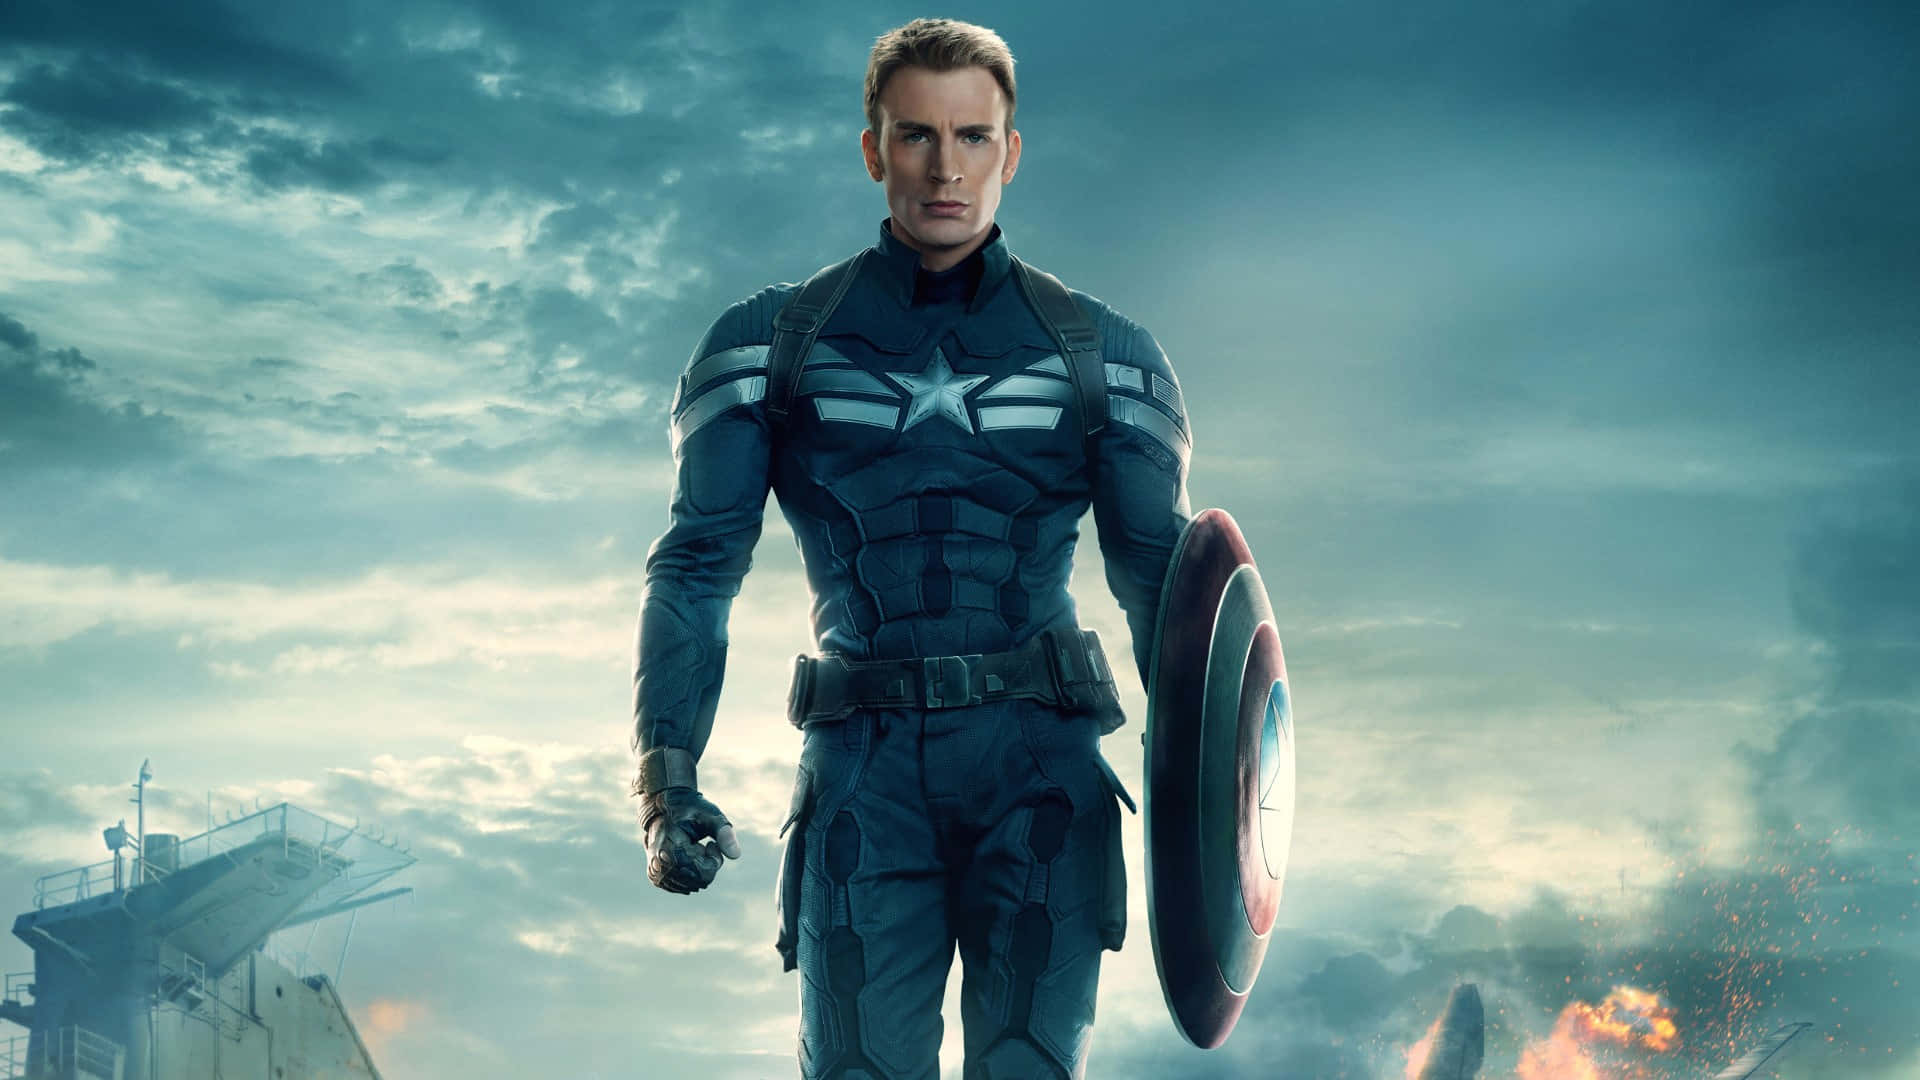 Captain America ready to take up his shield.